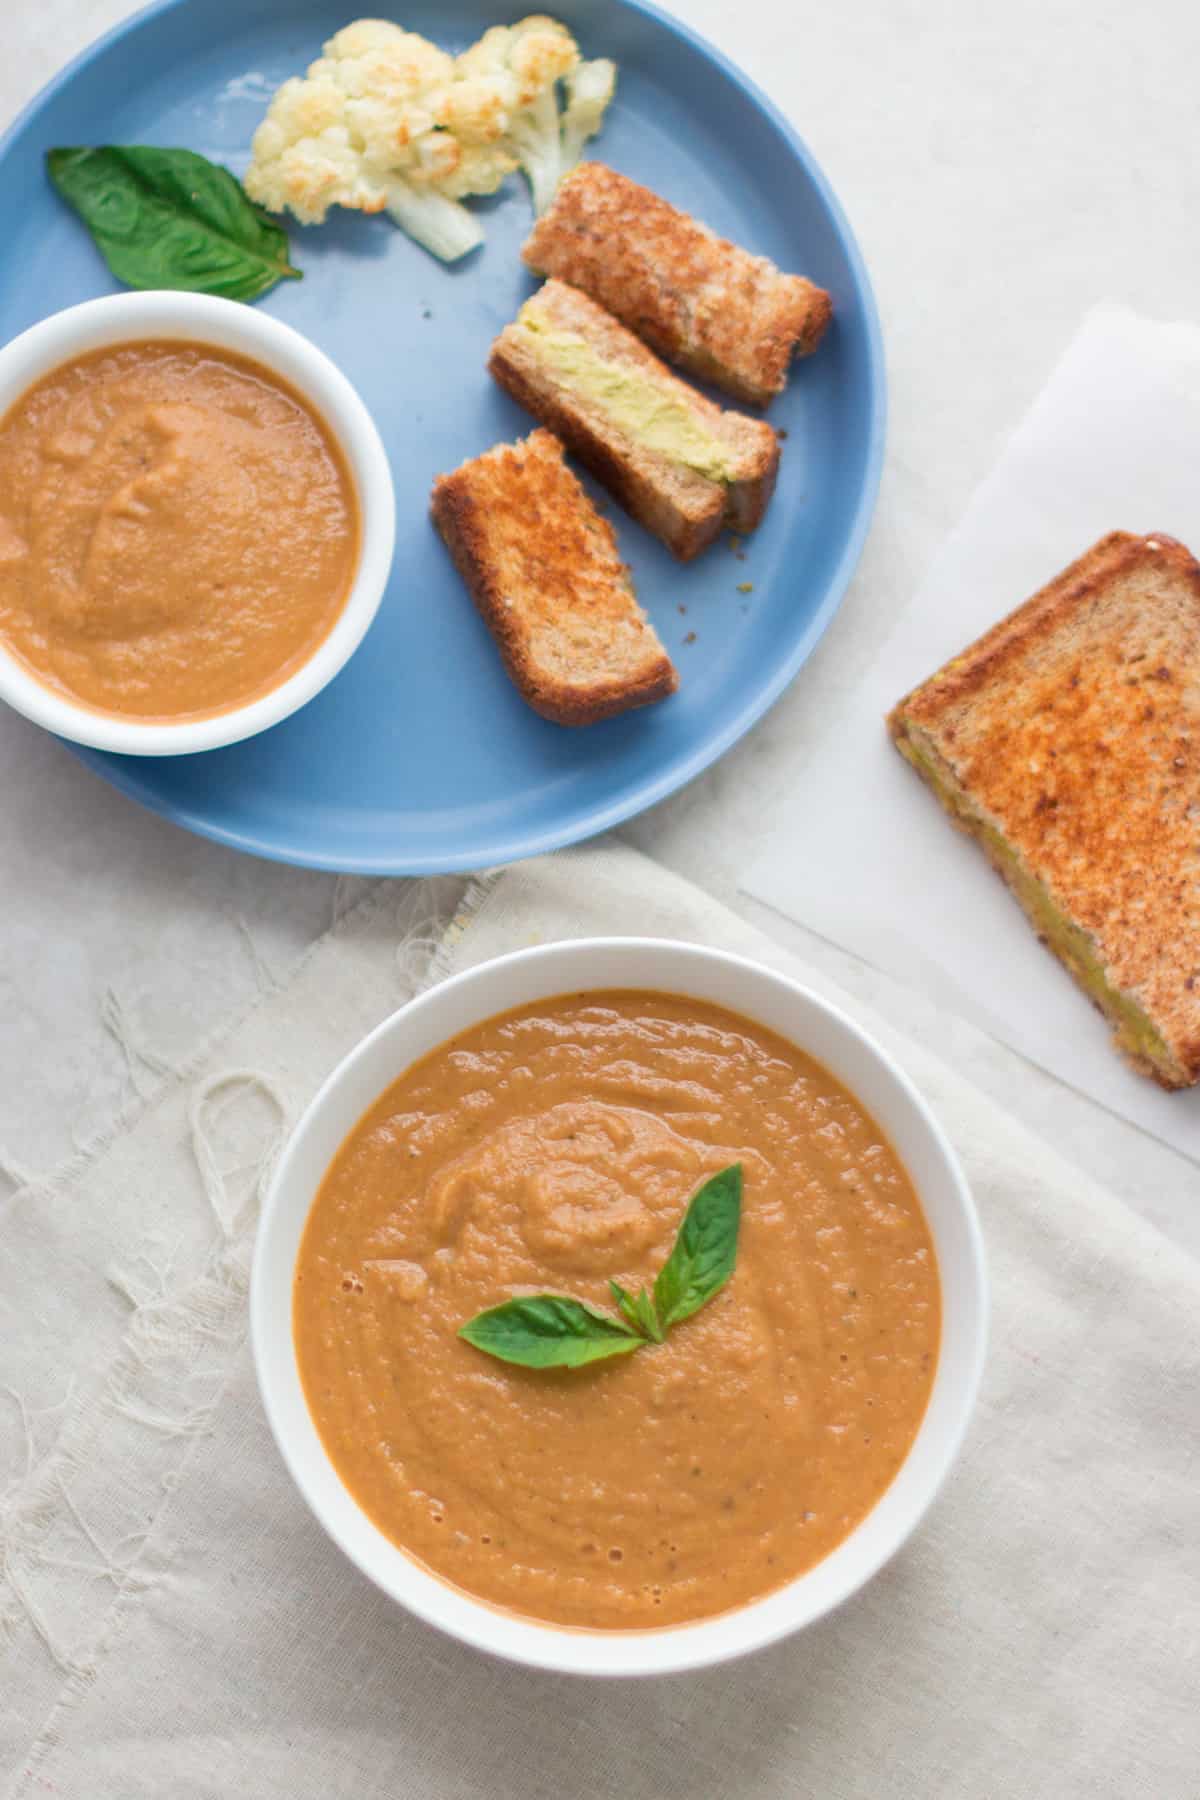 Soup served with grilled cheese sandwich.